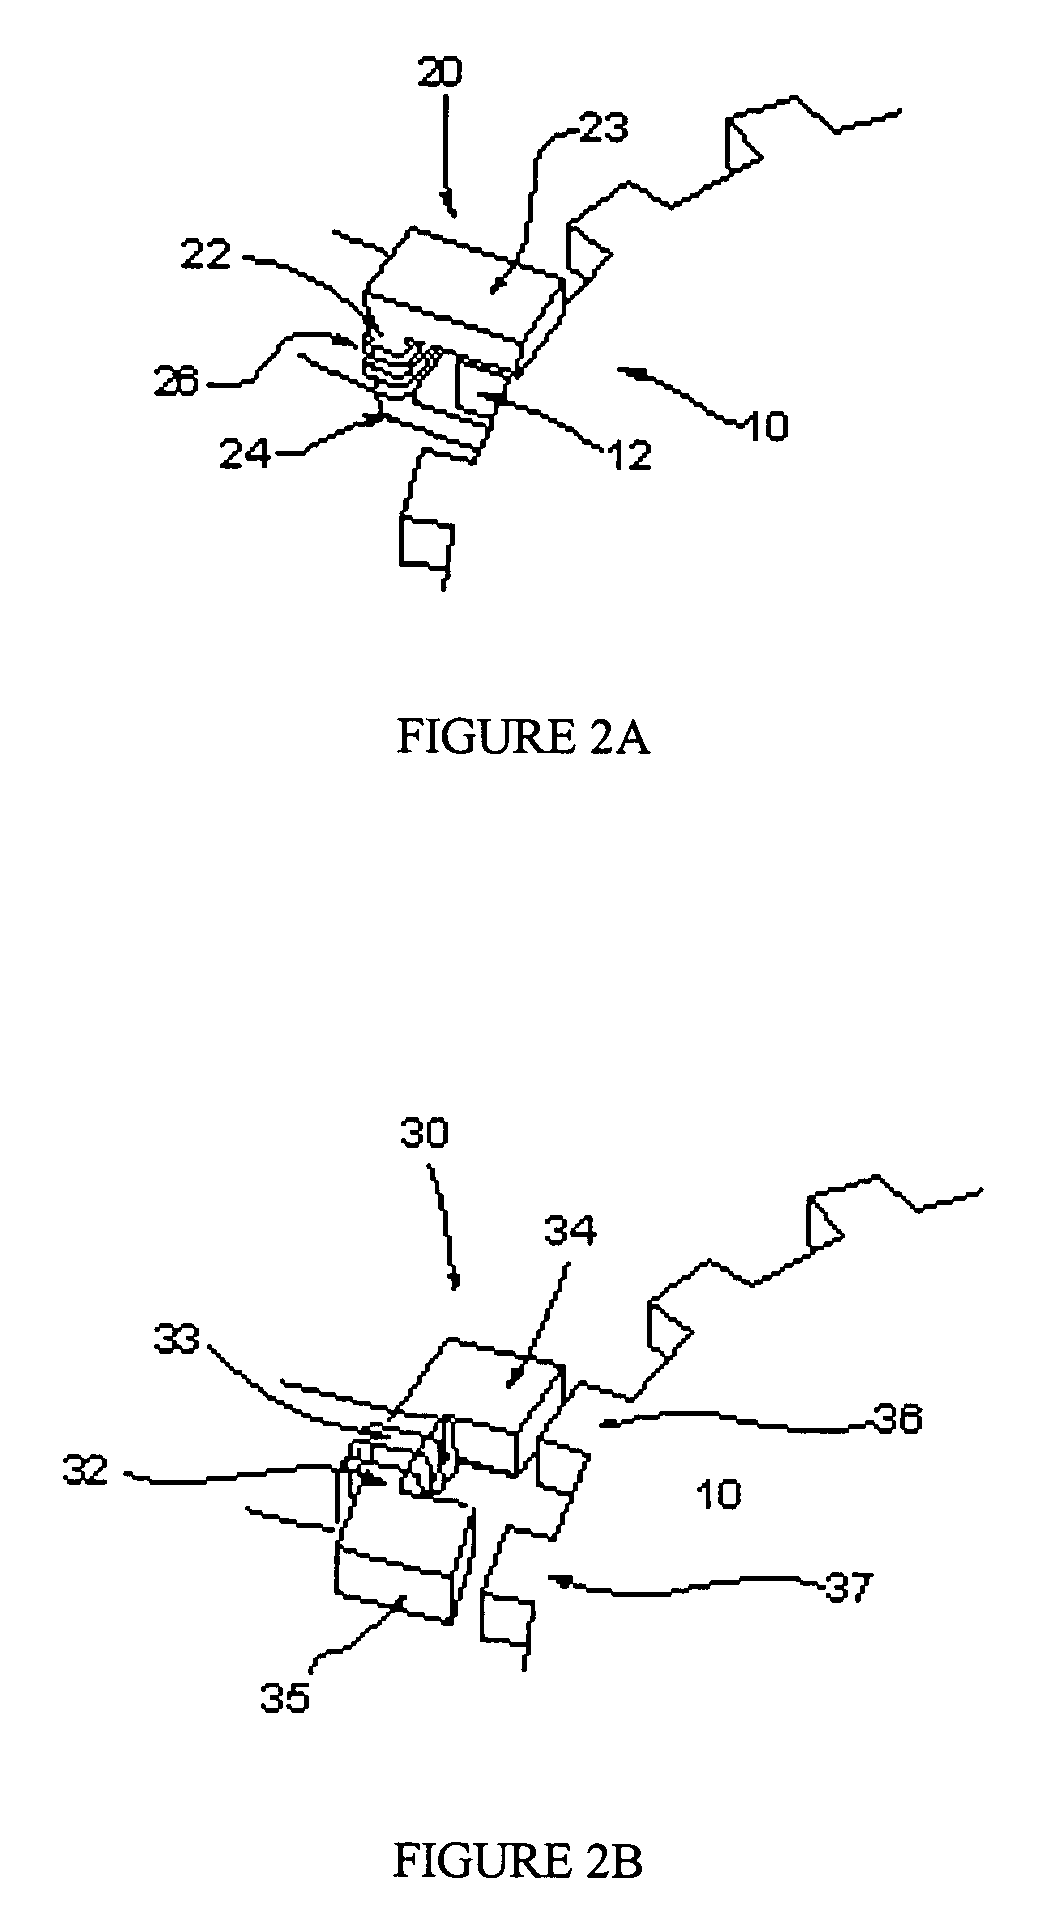 Rate gyroscope and accelerometer multisensor, and method of fabricating same